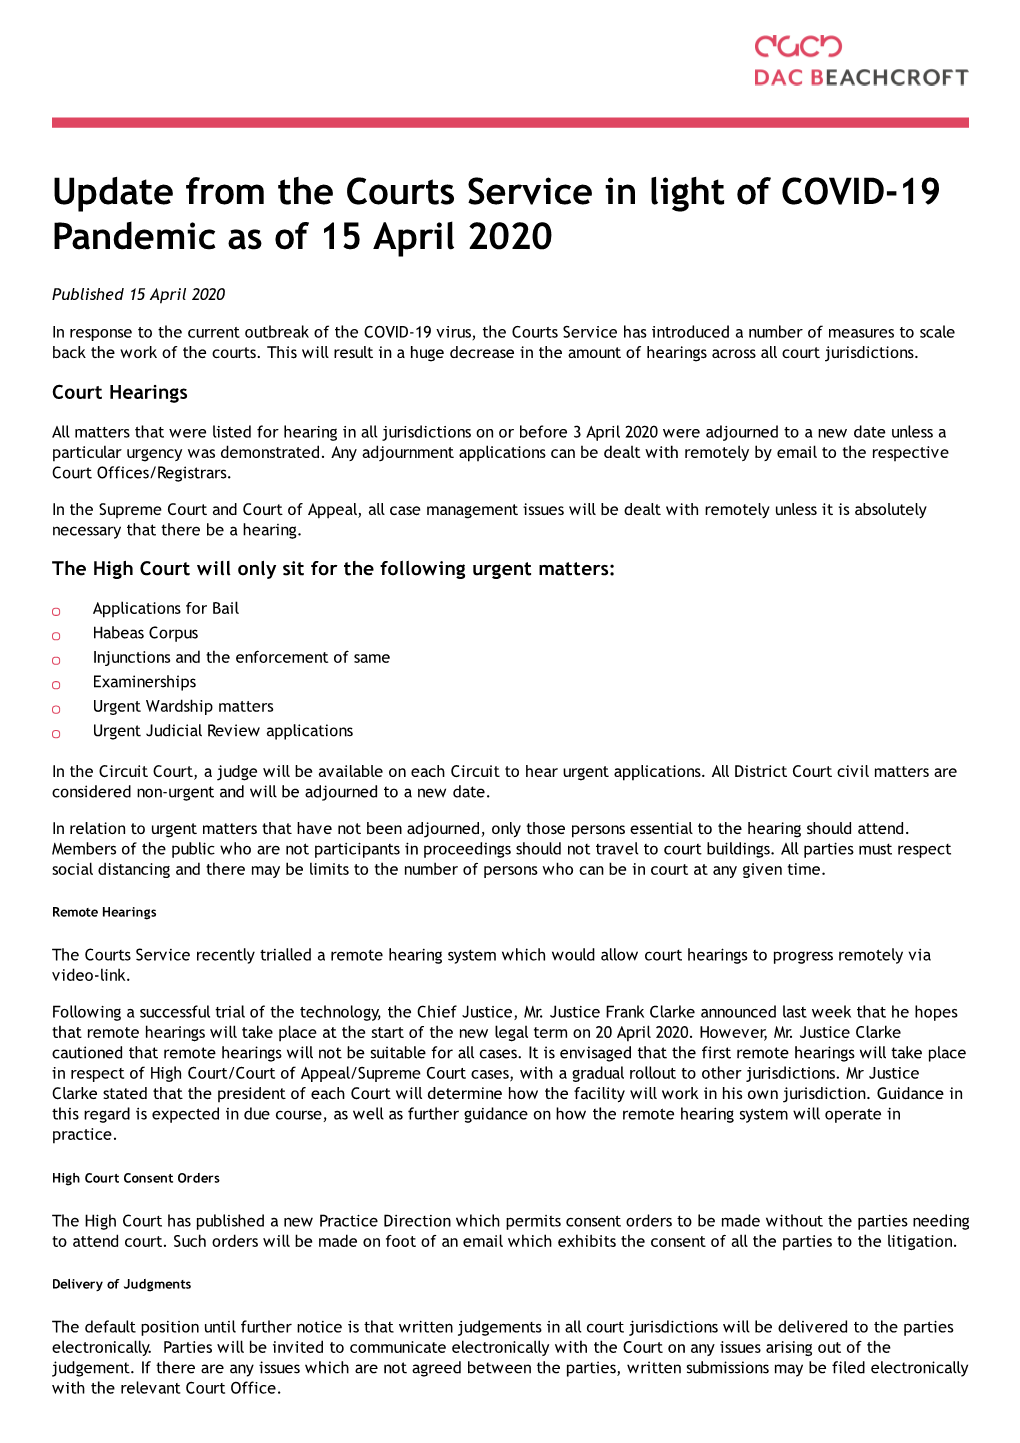 Update from the Courts Service in Light of COVID-19 Pandemic As of 15 April 2020